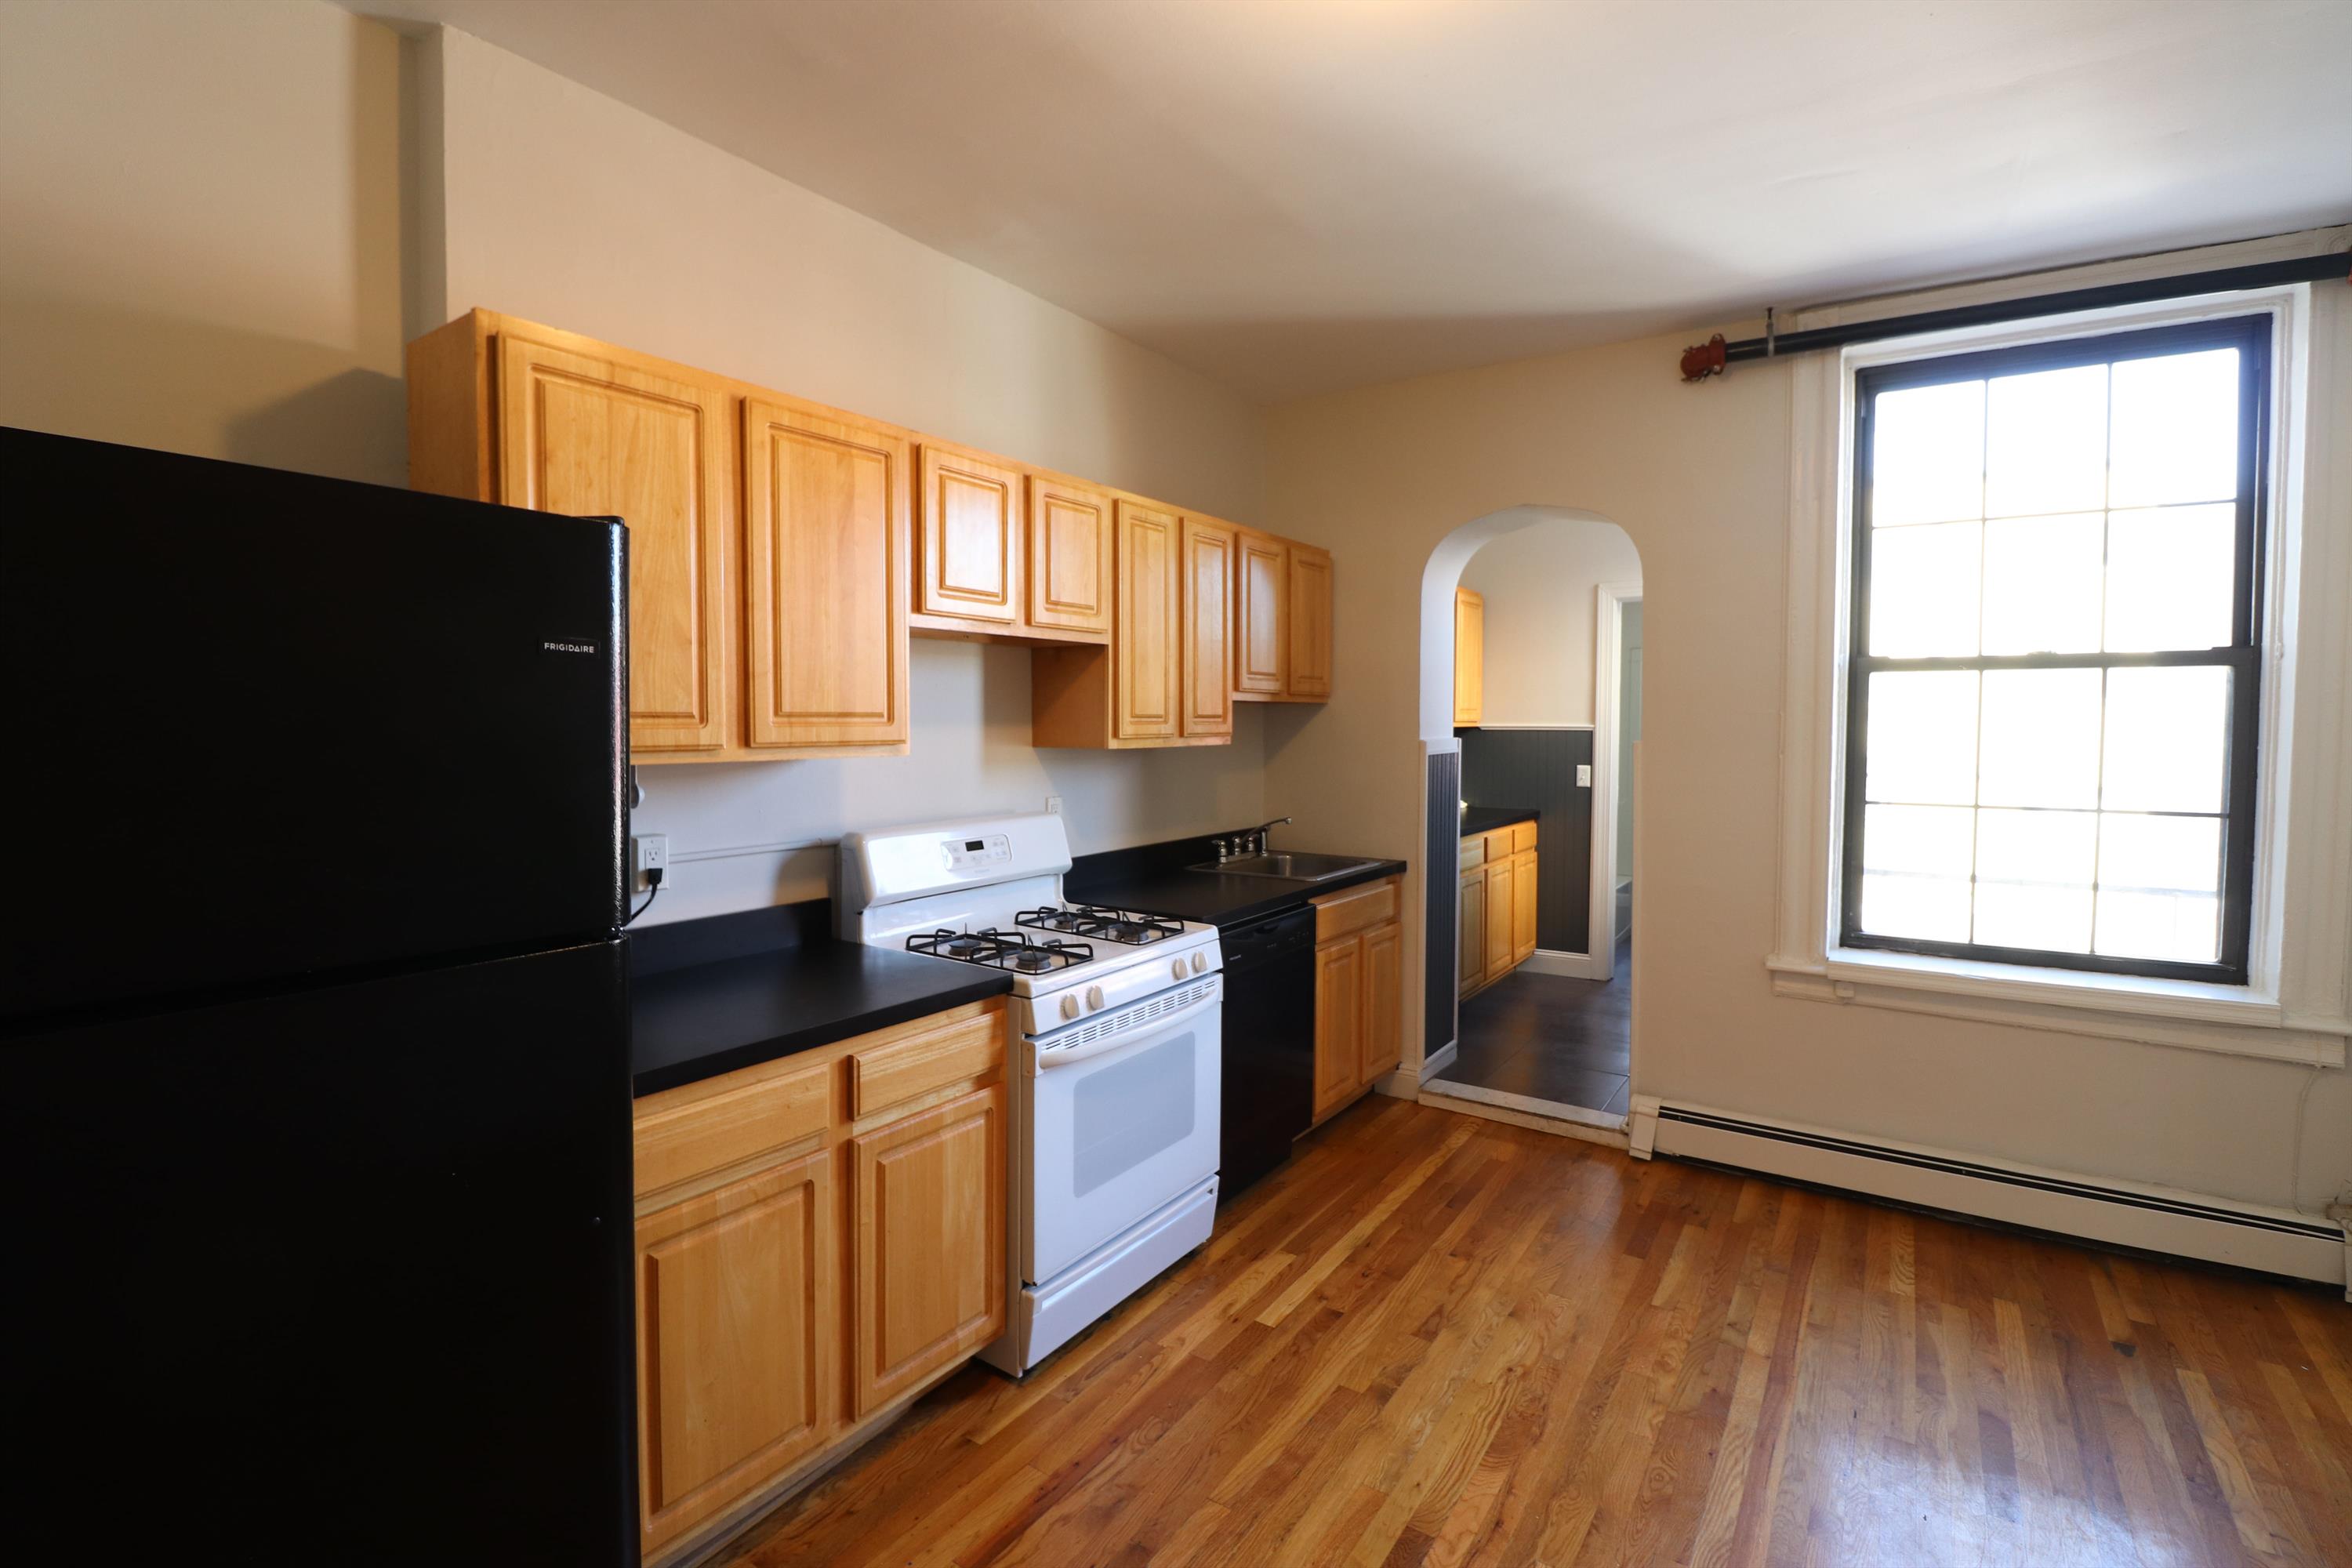 ***NO BROKER FEE*** Charming 4bed/2bath in Hoboken. Hardwood floors throughout, high ceilings, big bedrooms. Washer & Dryer will be installed. Perfect for shares. Next to restaurants, shopping, parks, bus to NYC, close to lightrail and PATH. Price is based on a 1 free month on a 13 month lease amortized rent.